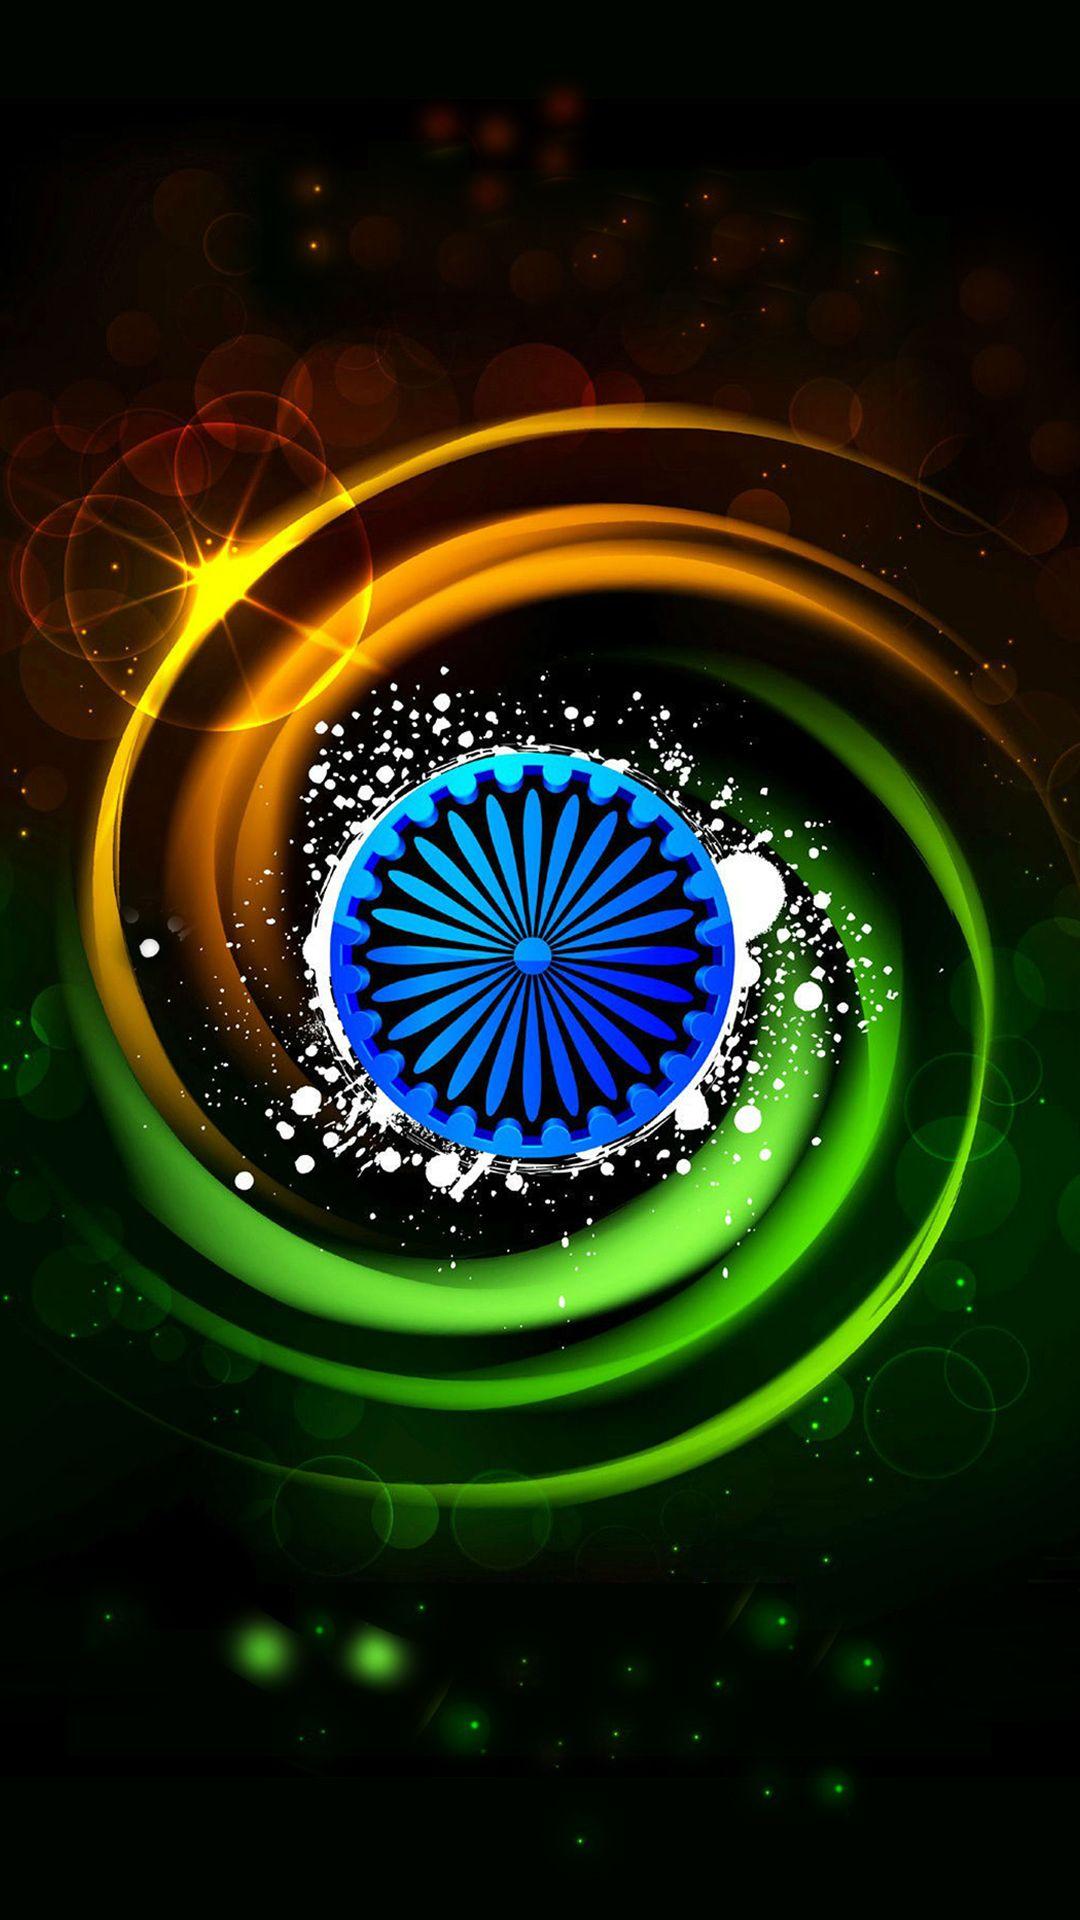 India Flag for Mobile Phone Wallpaper 08 of 17 in 3D Wallpaper. Wallpaper Download. High Resolution Wallpaper